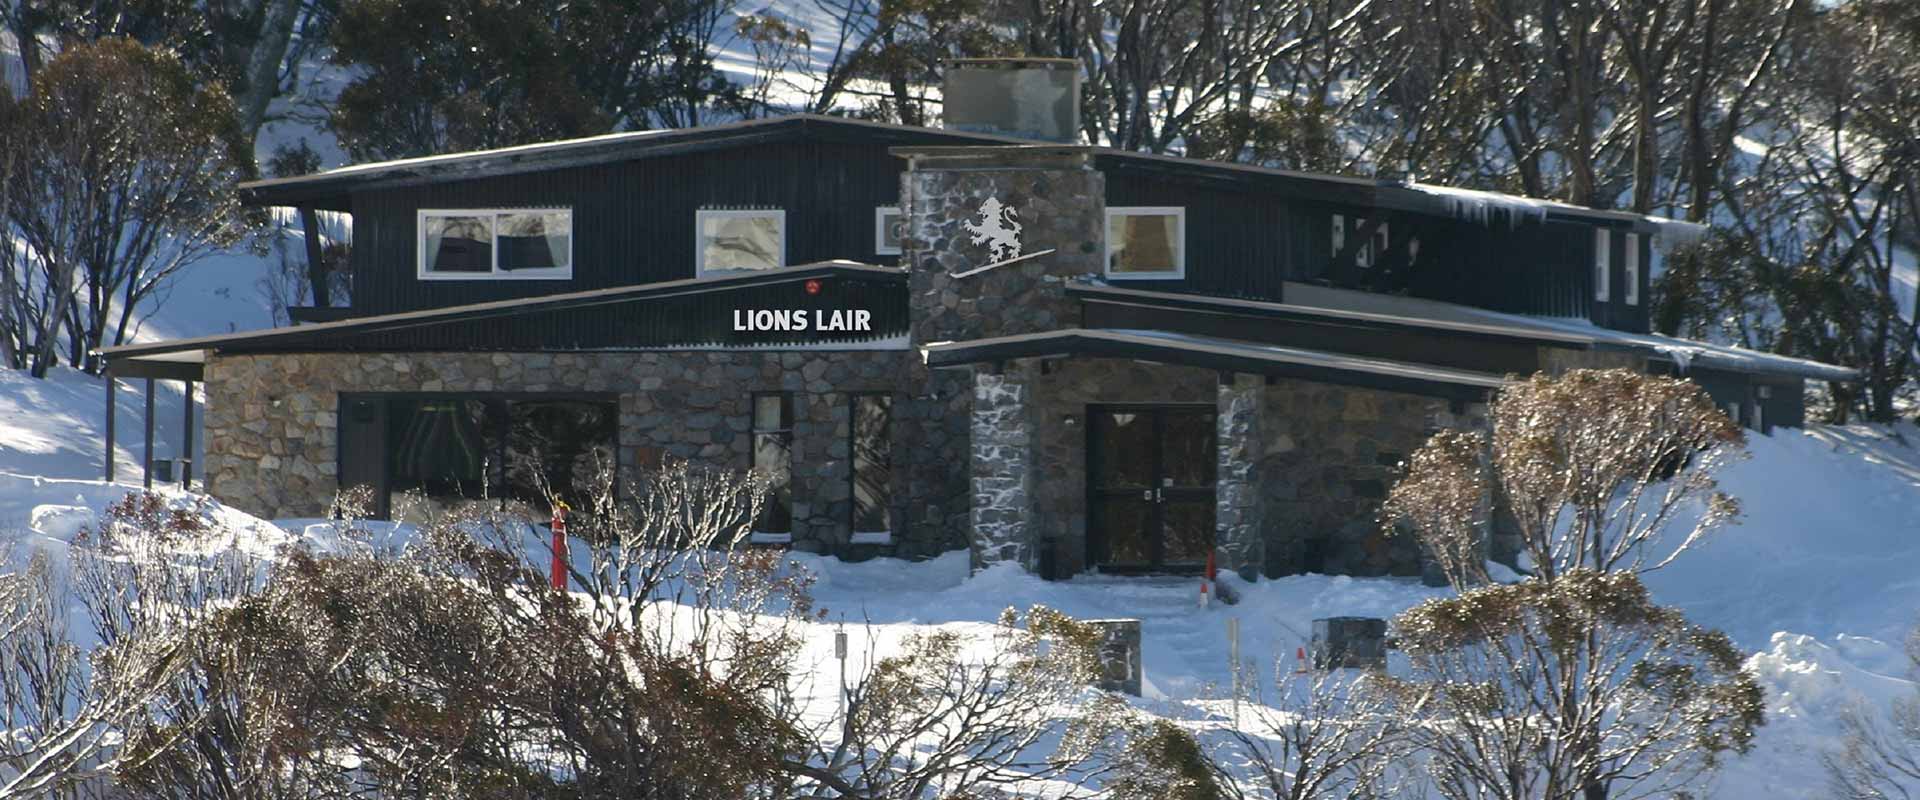 The Lions Lair Lodge